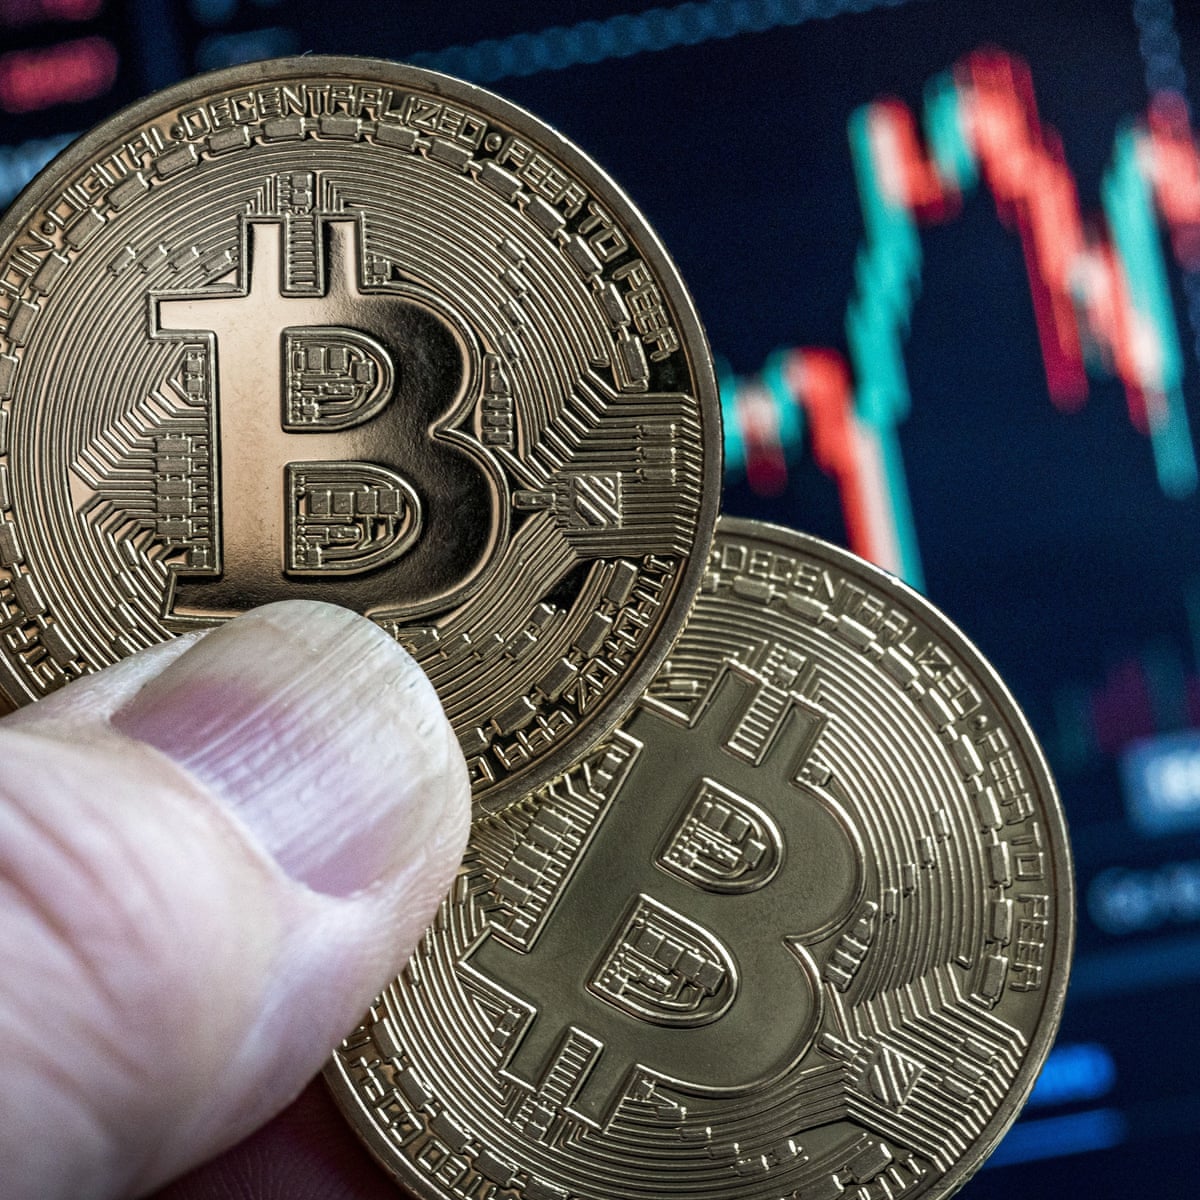 Highest rises in cryptocurrency can litecoin pass bitcoin